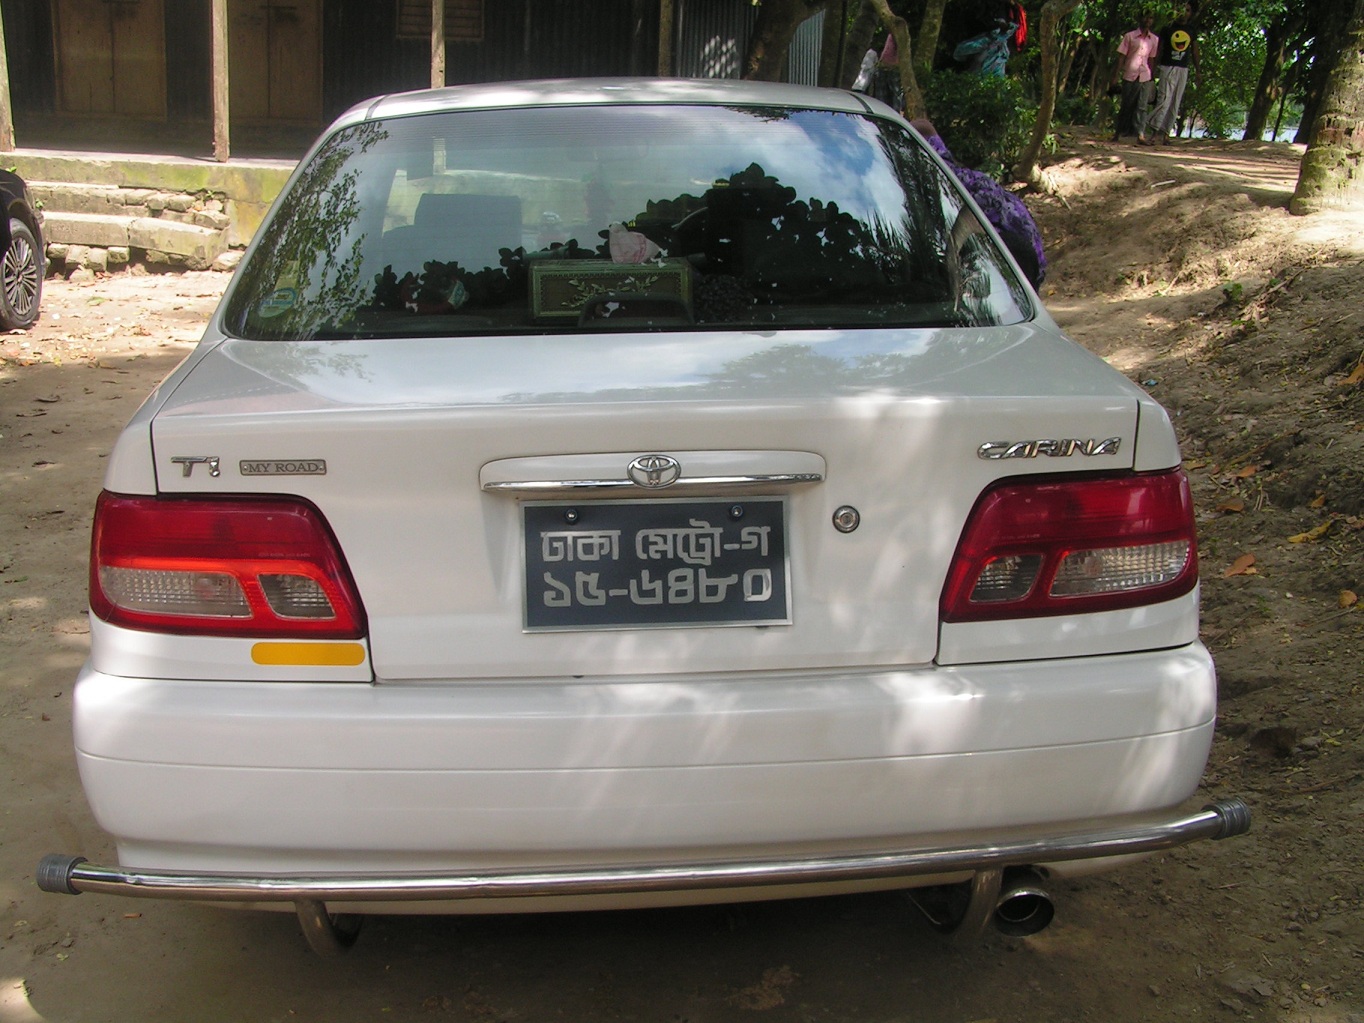 TOYOTA CARINA TI MY ROAD No CNG 1500CC 1999 SOLD large image 0